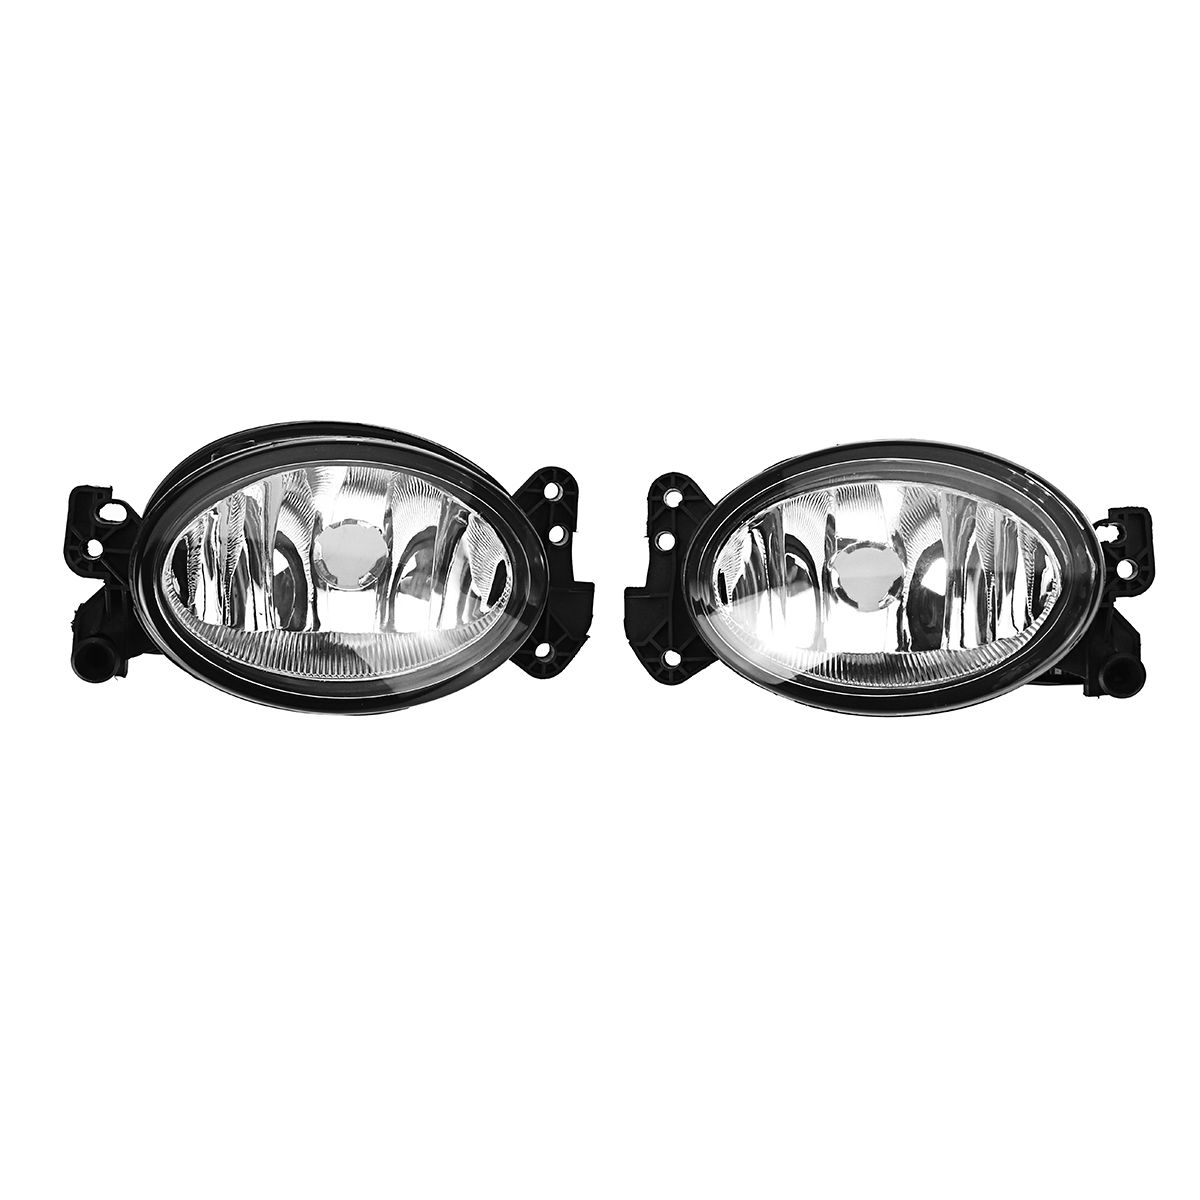 Car-Front-Bumper-Fog-Lights-Lamp-Case-with-No-Bulb-For-Benz-W204-W211-W219-W164-2007-2012-1579820